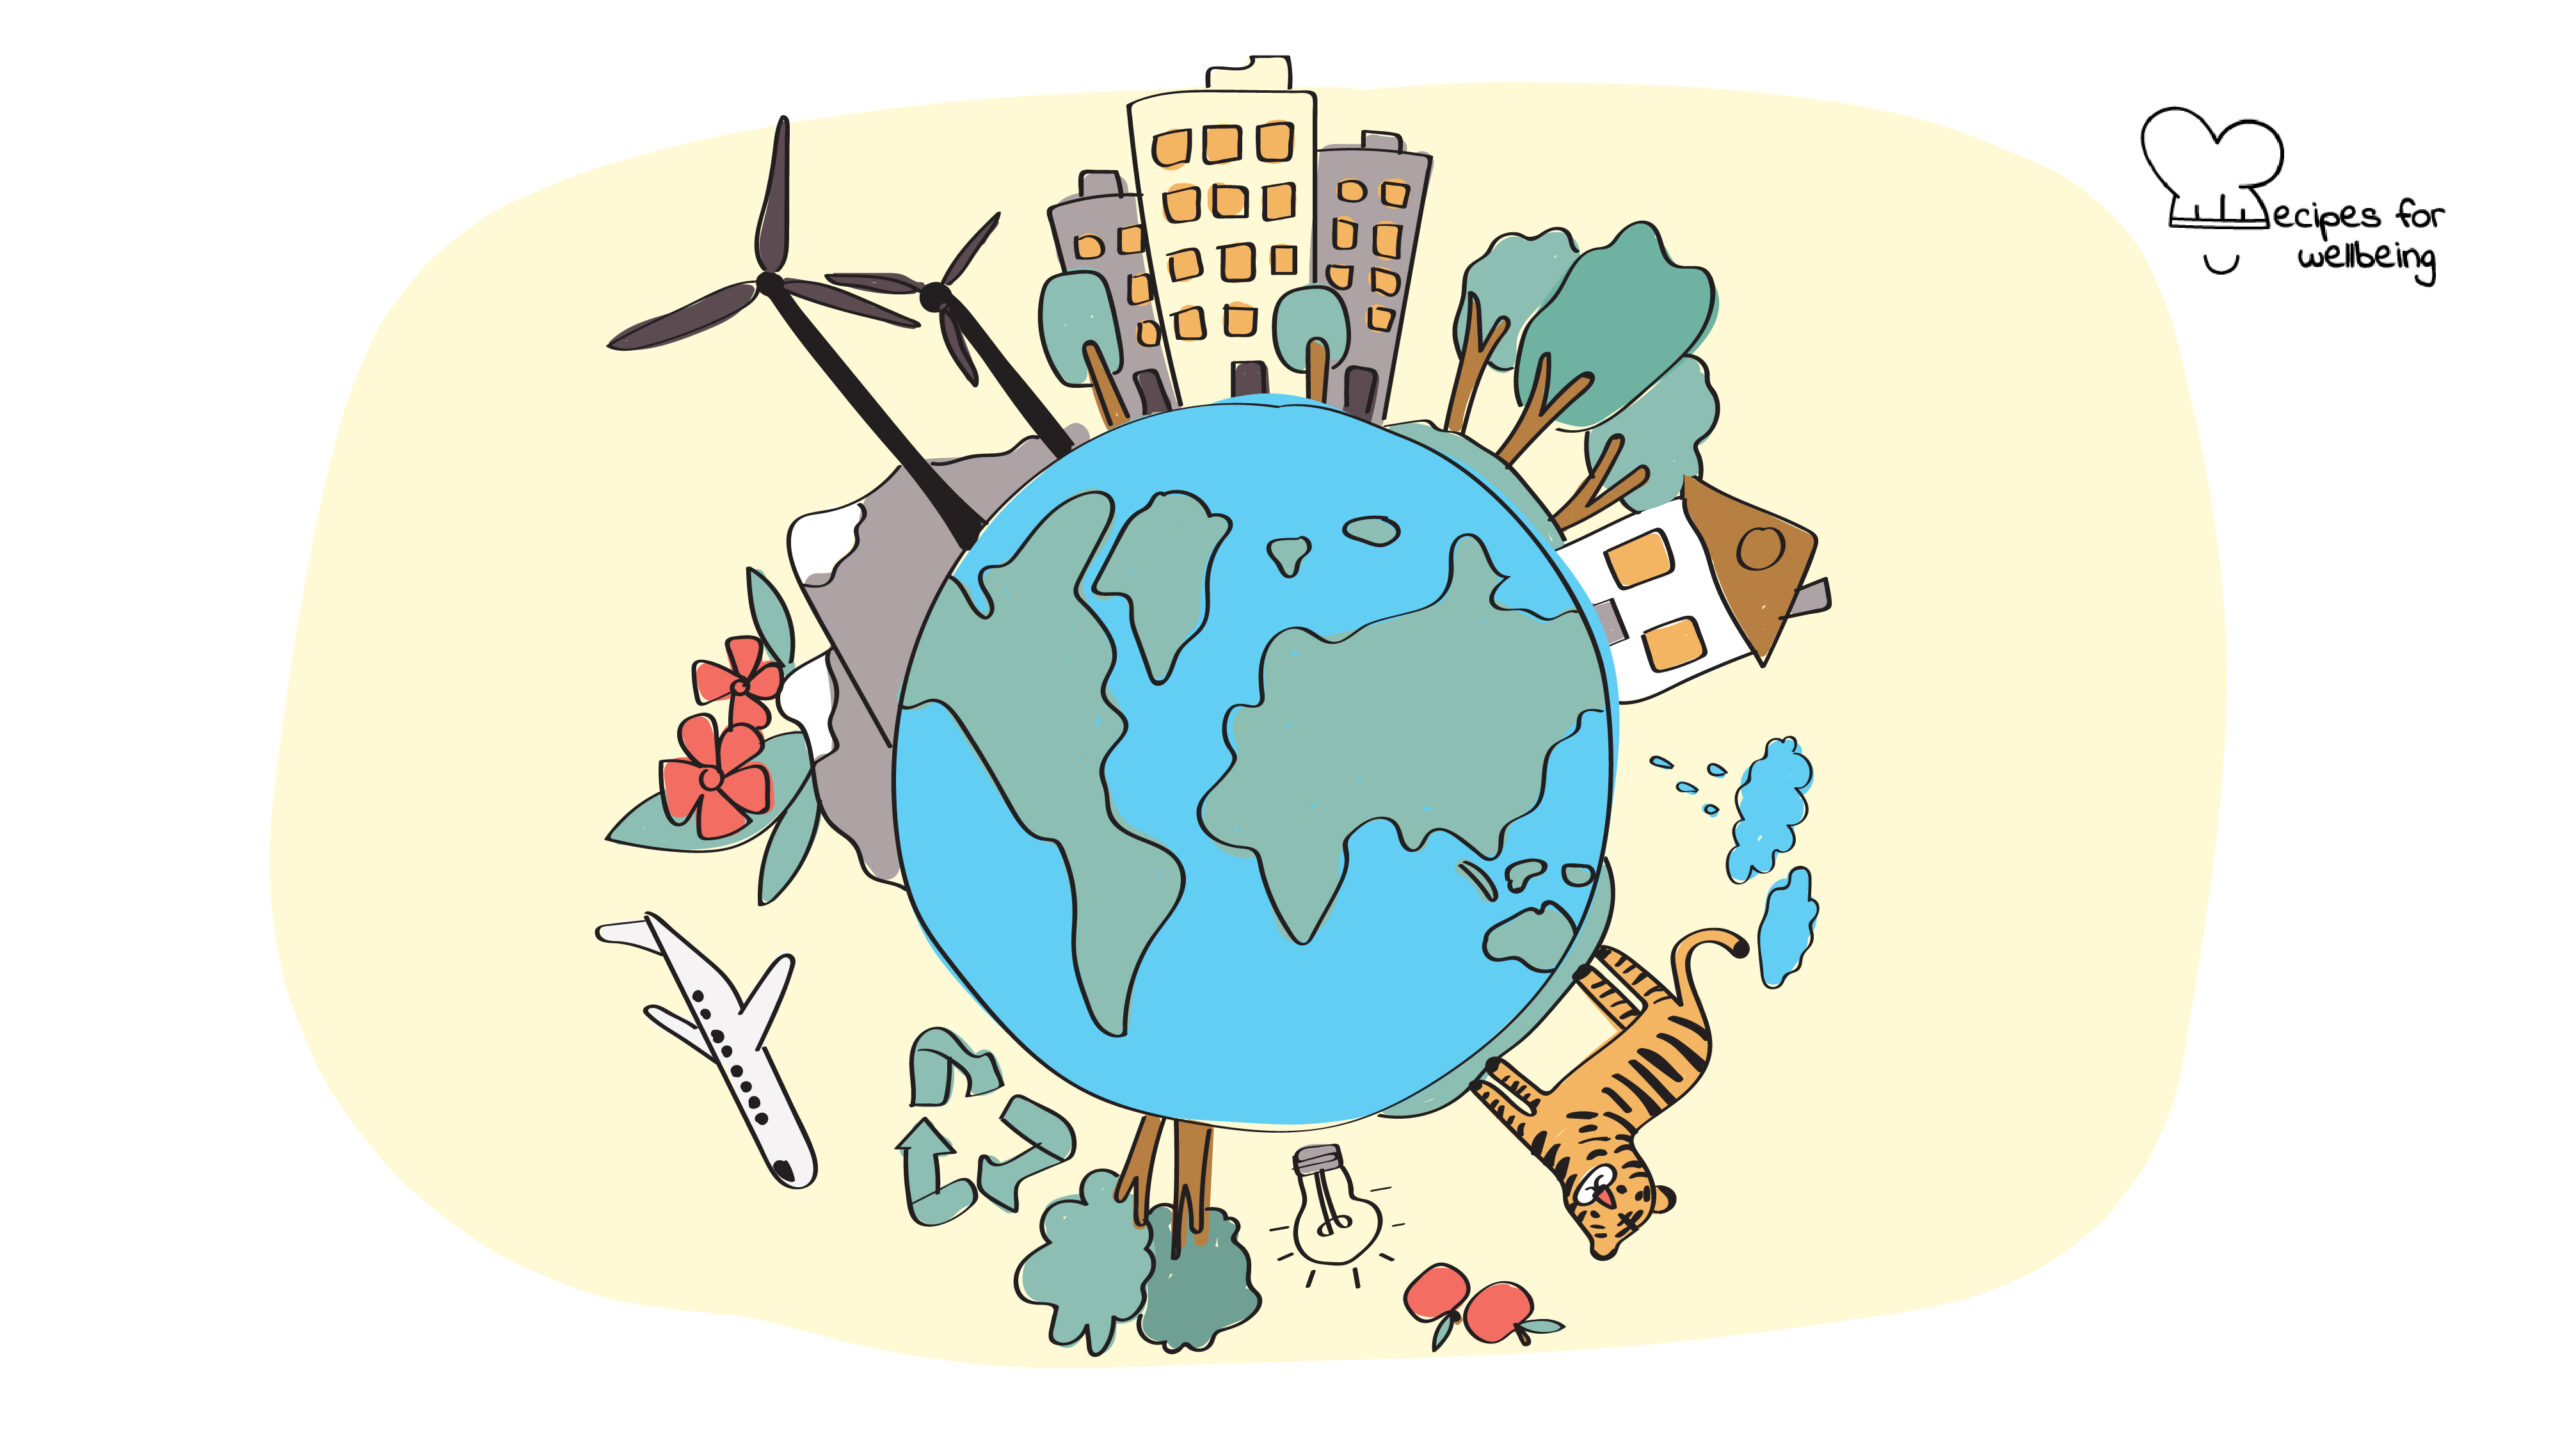 Illustration of planet Earth surrounded by icons such as 3 storey buildings, trees, a house, clouds, a tiger, 2 apples, a light bulb, the recycling symbol, a plane, flowers, mountains, and eolic turbines. © Recipes for Wellbeing